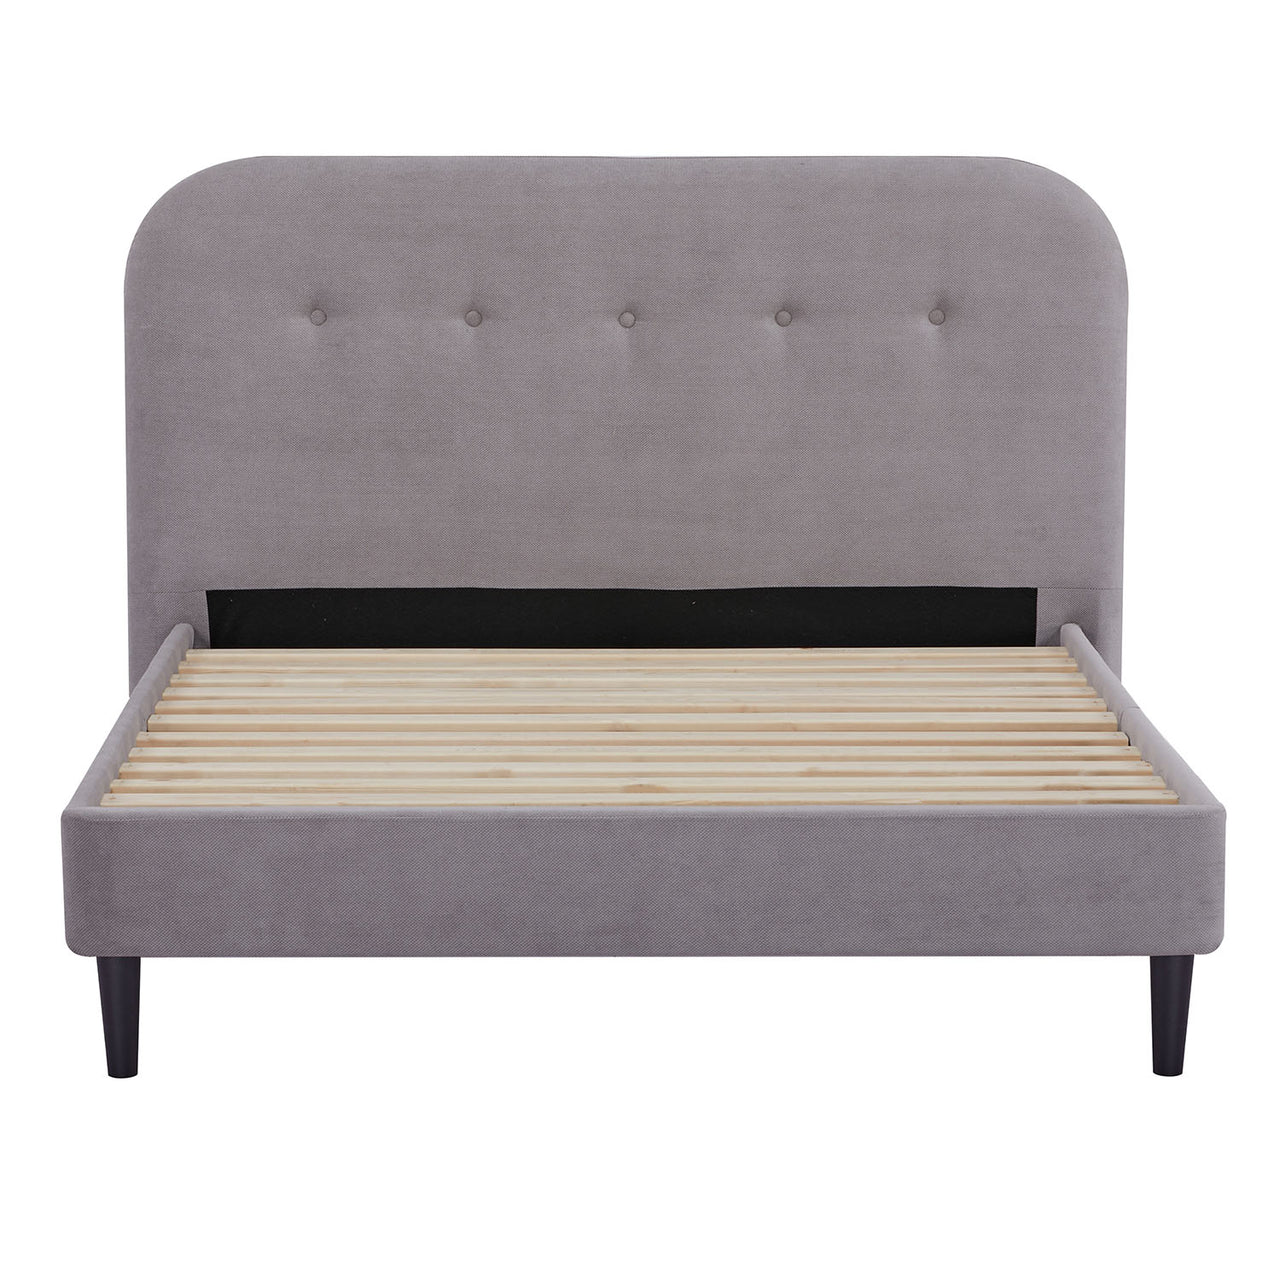 REM-Fit Luxe Bed Frame